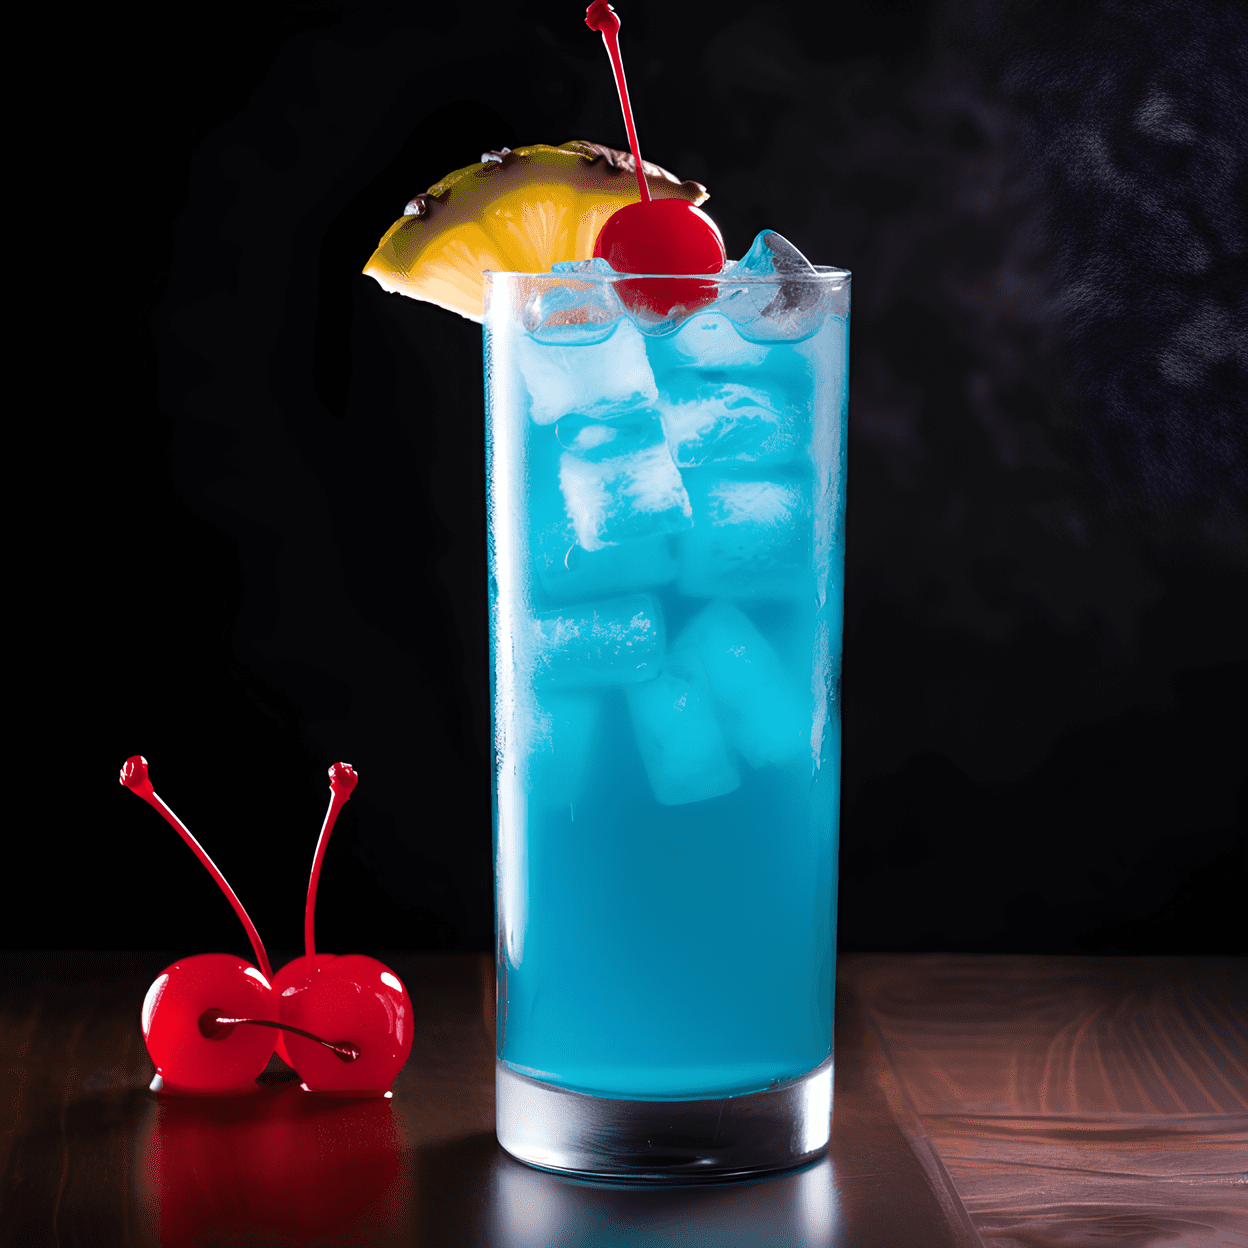 Blue Breeze Cocktail Recipe - The Blue Breeze is a sweet, tangy, and slightly tart cocktail. It has a strong fruity flavor, with the pineapple and coconut creating a tropical taste. The blue curaçao adds a hint of citrus and gives the drink its distinctive blue color.